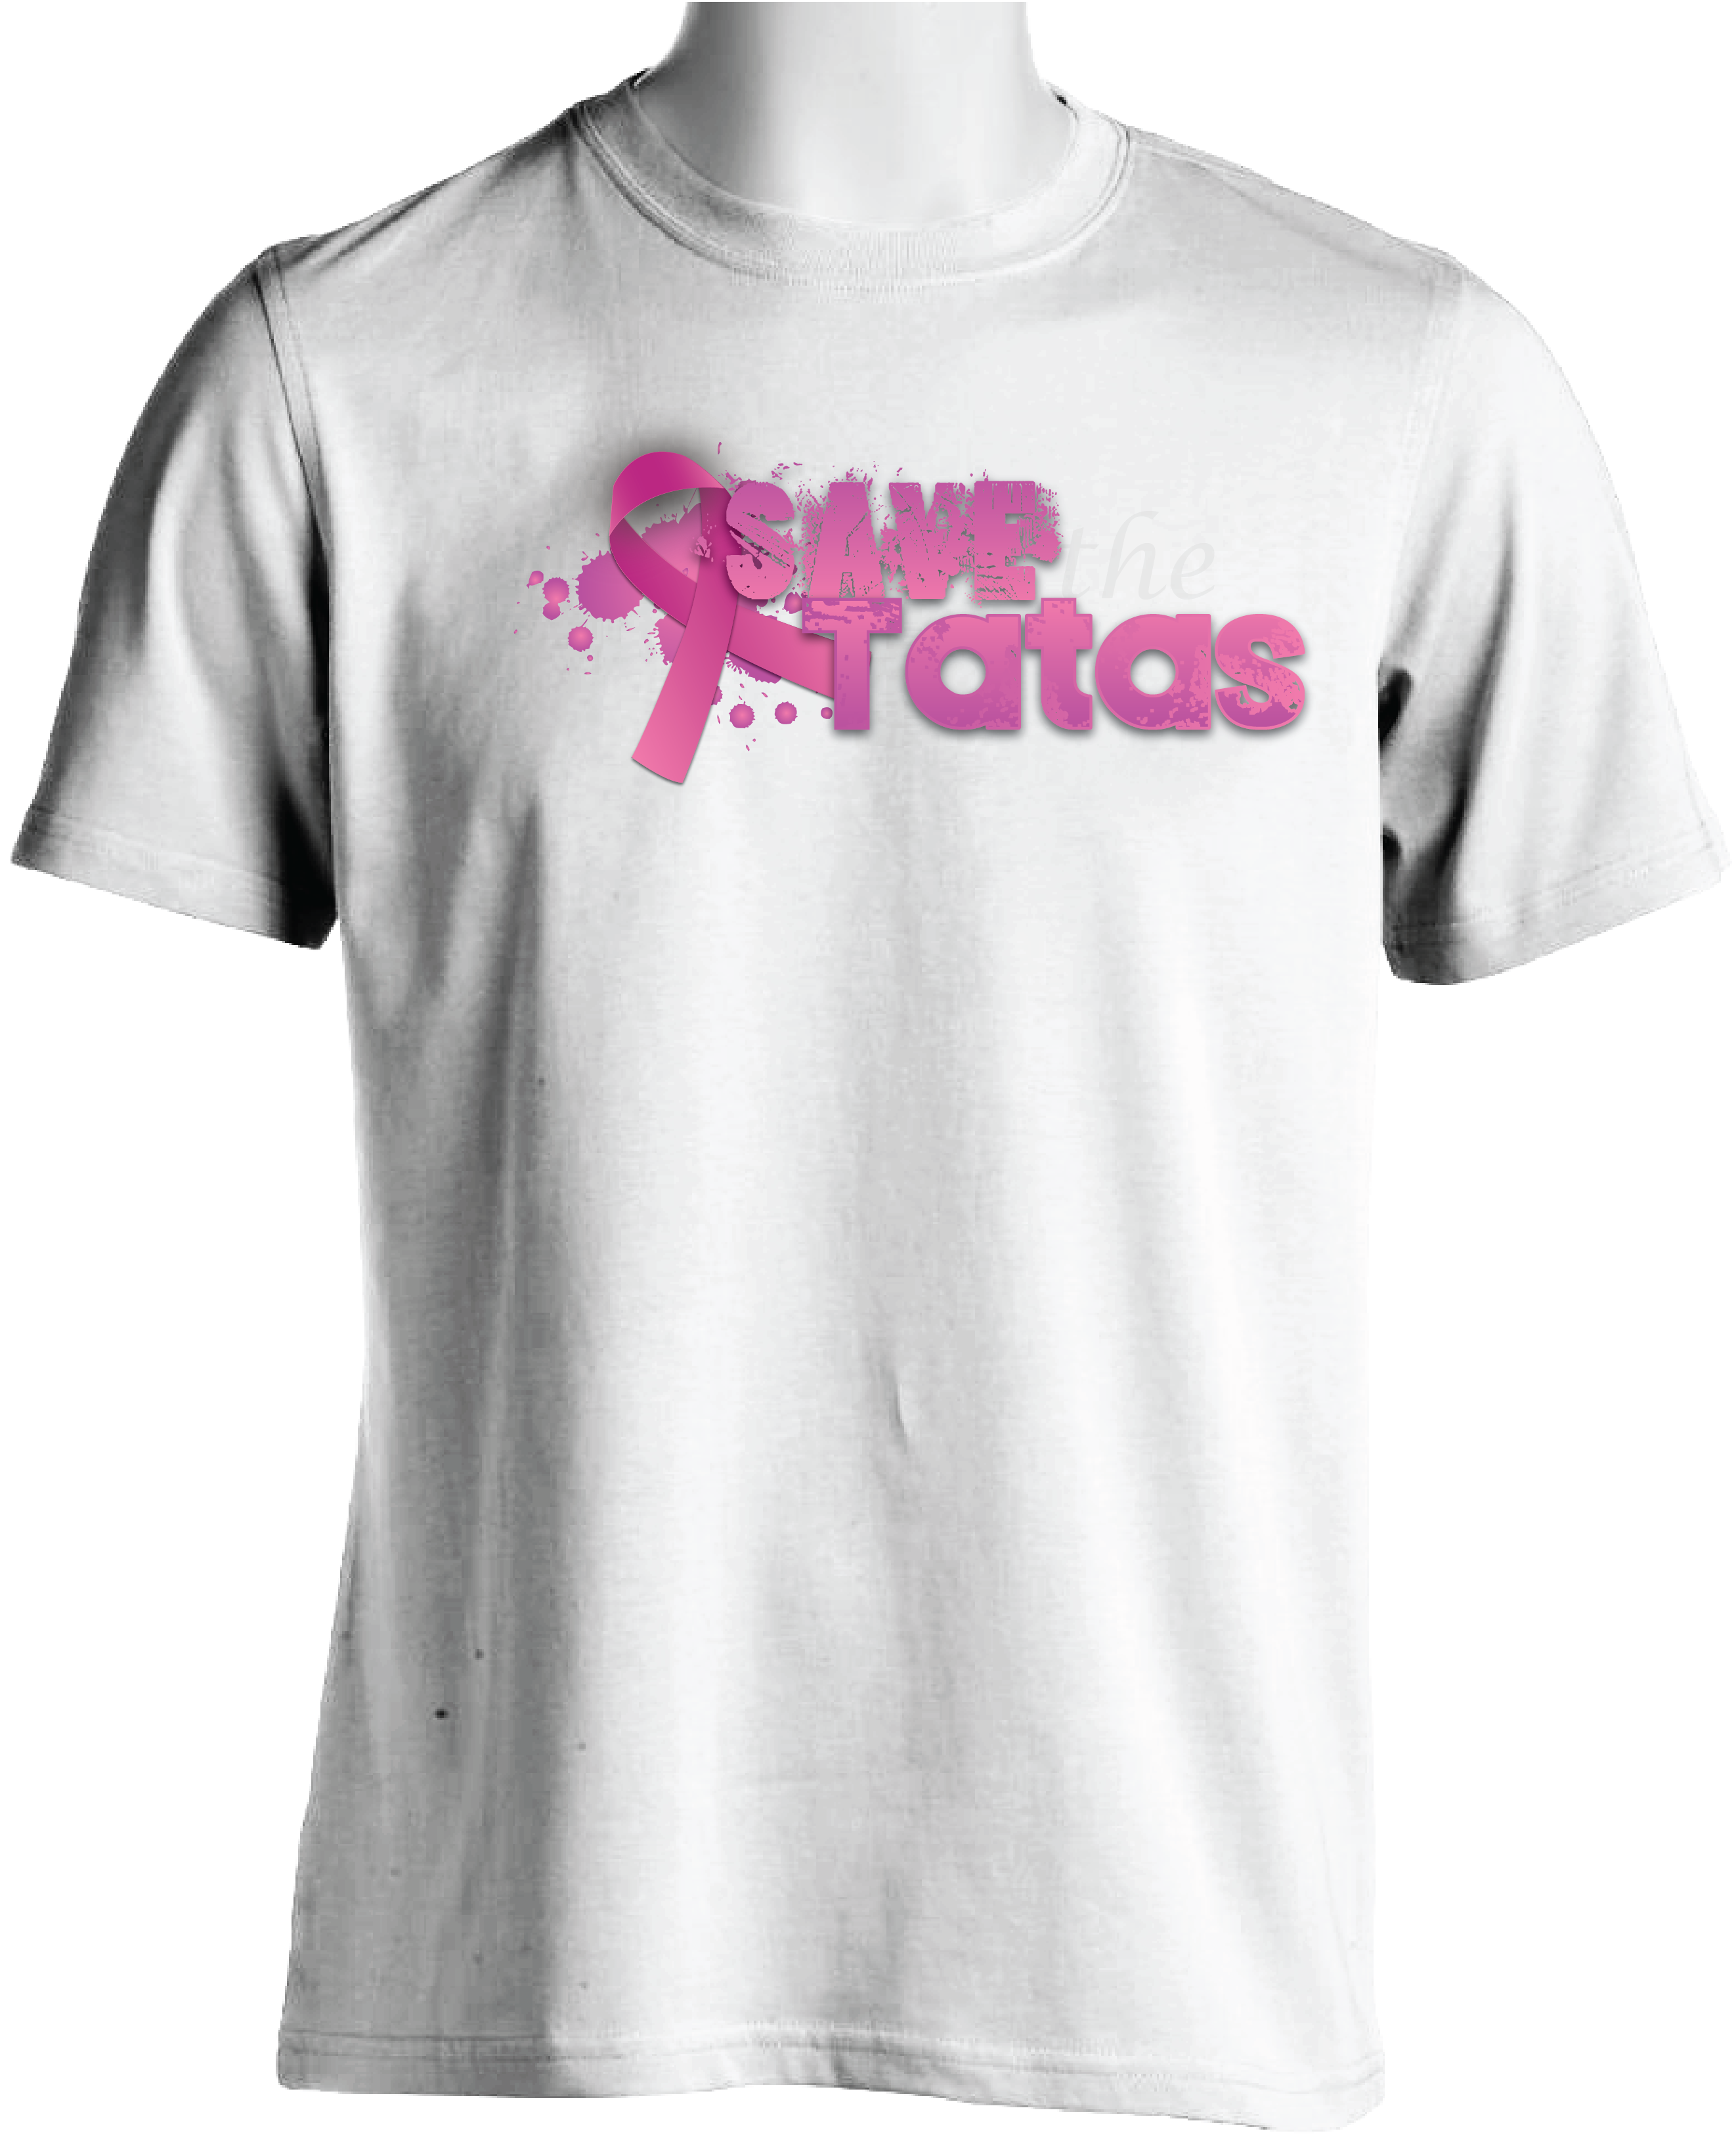 Protect the Tatas - Women's Cropped T-Shirt